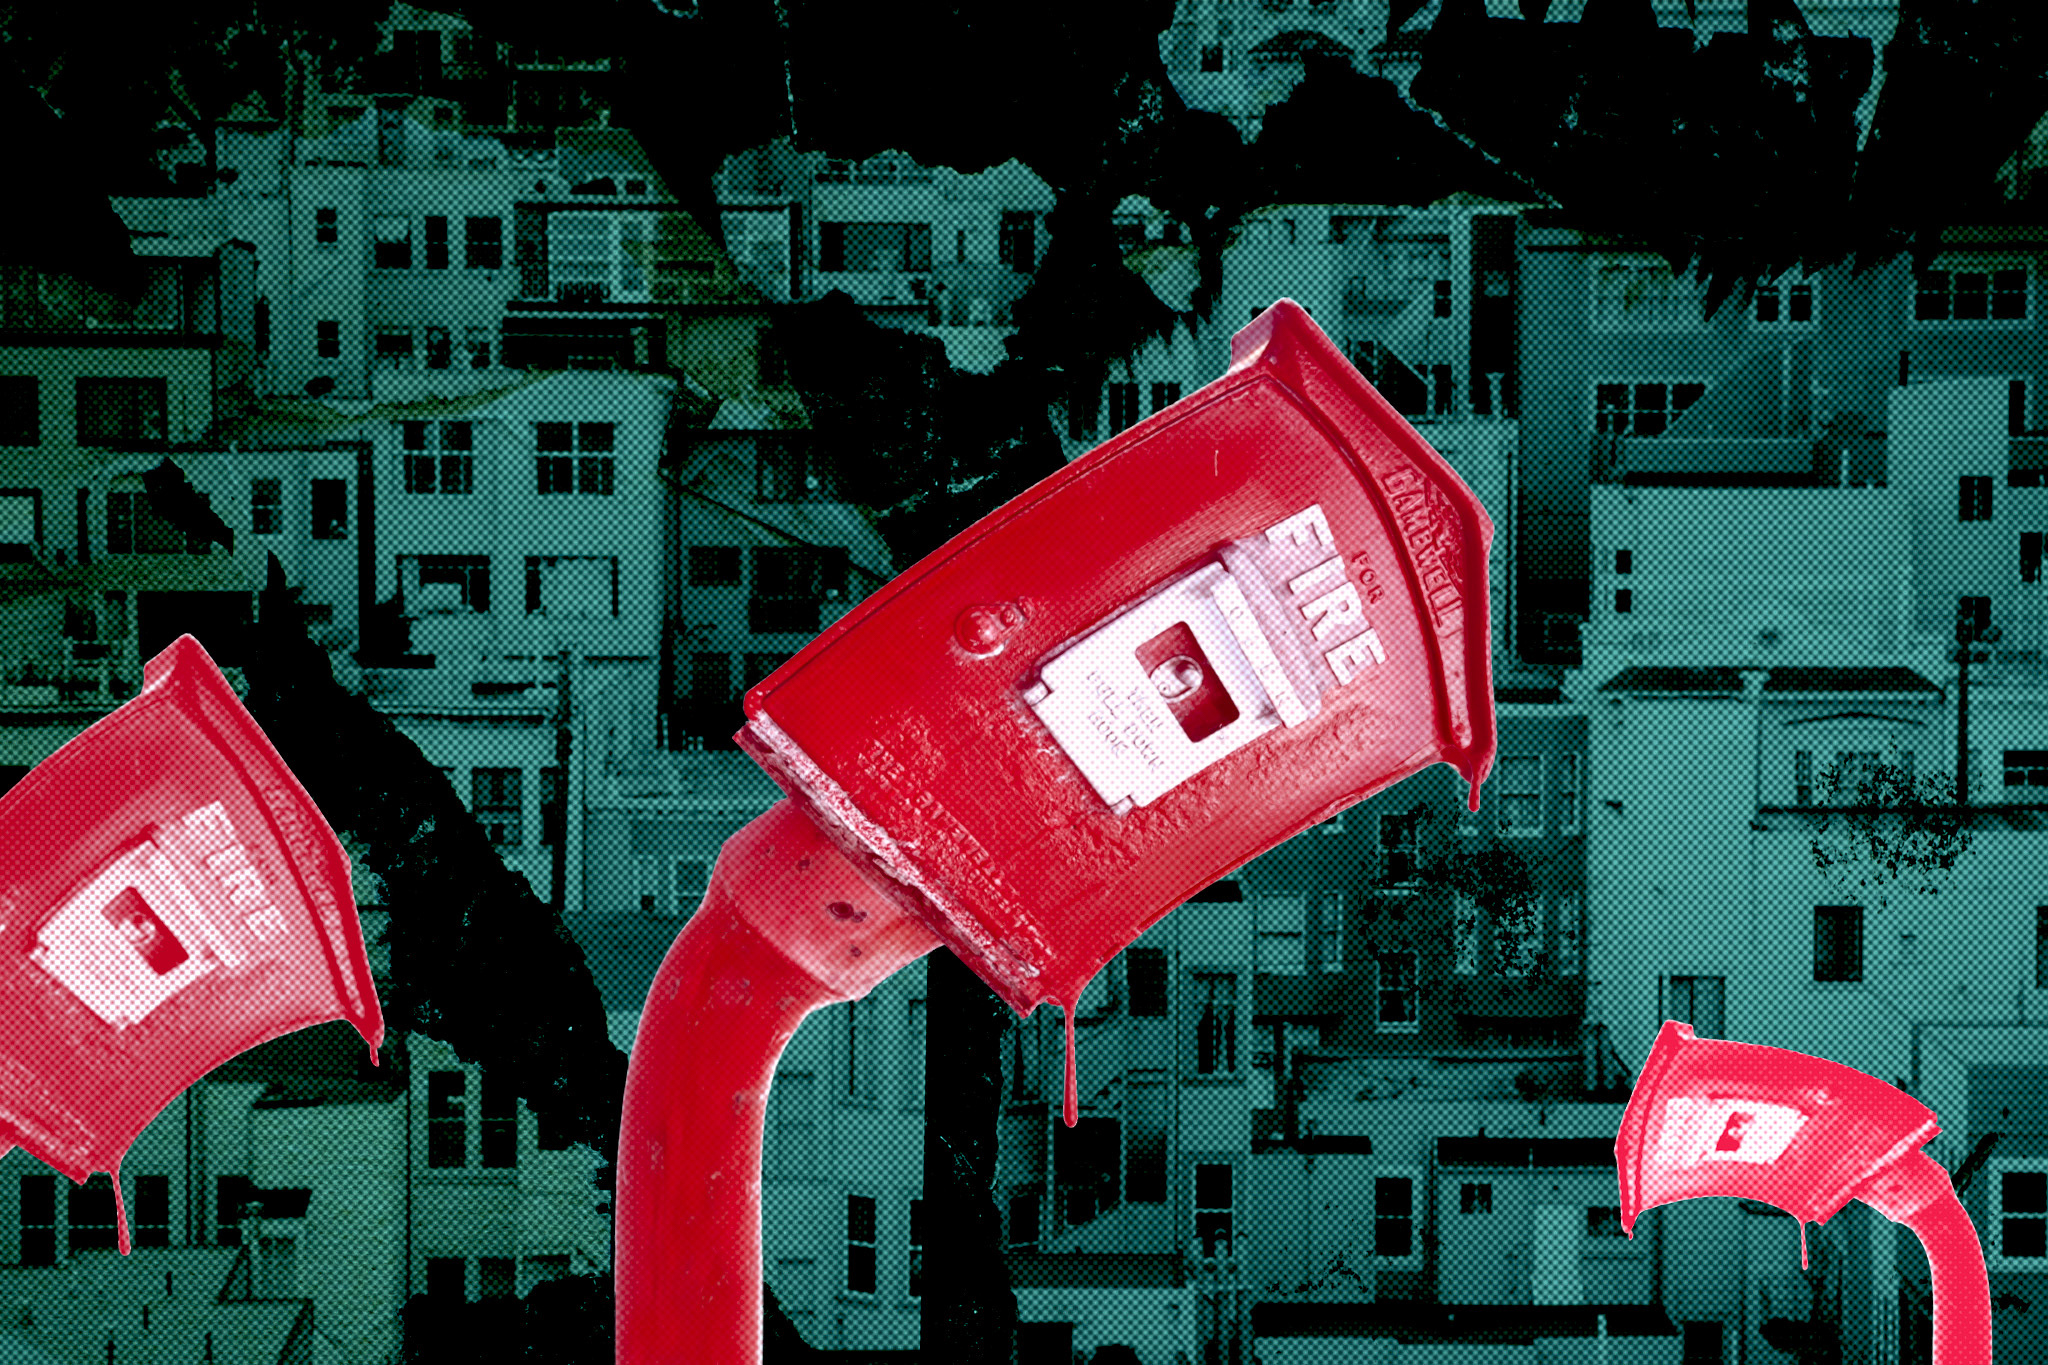 An illustration shows San Francisco emergency call boxes wilting.